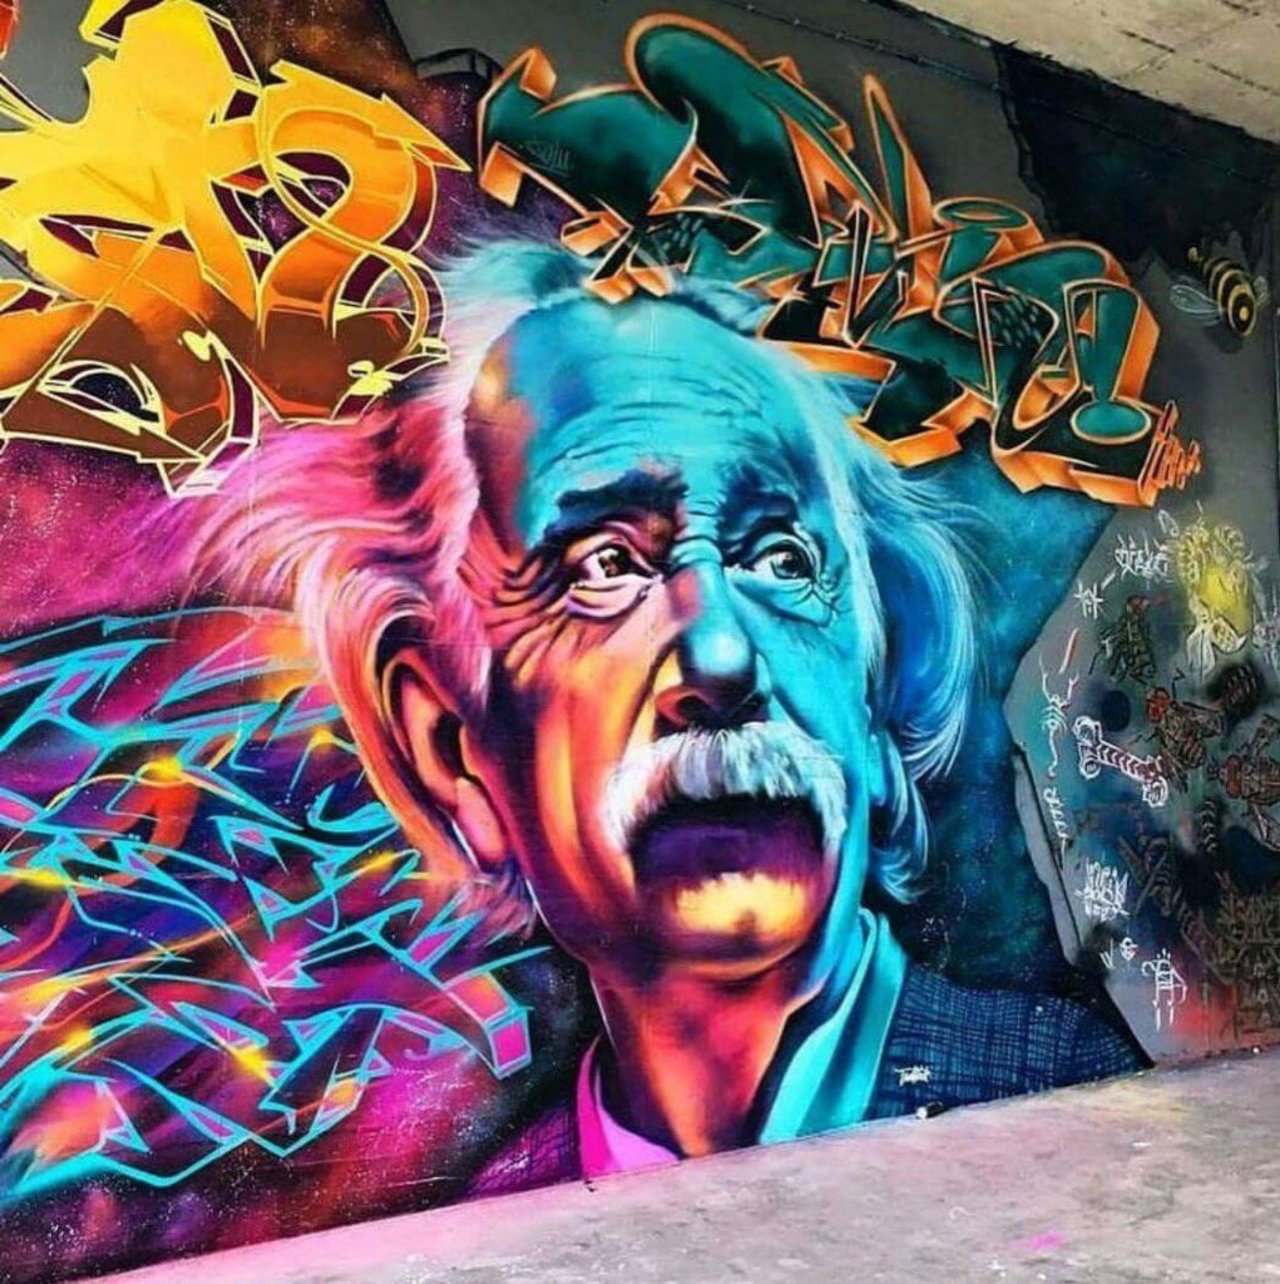 Check this out: Einstein #StreetArt #Graffiti Mural By Alex Ander. #Germany https://t.co/FDqdCL79hu